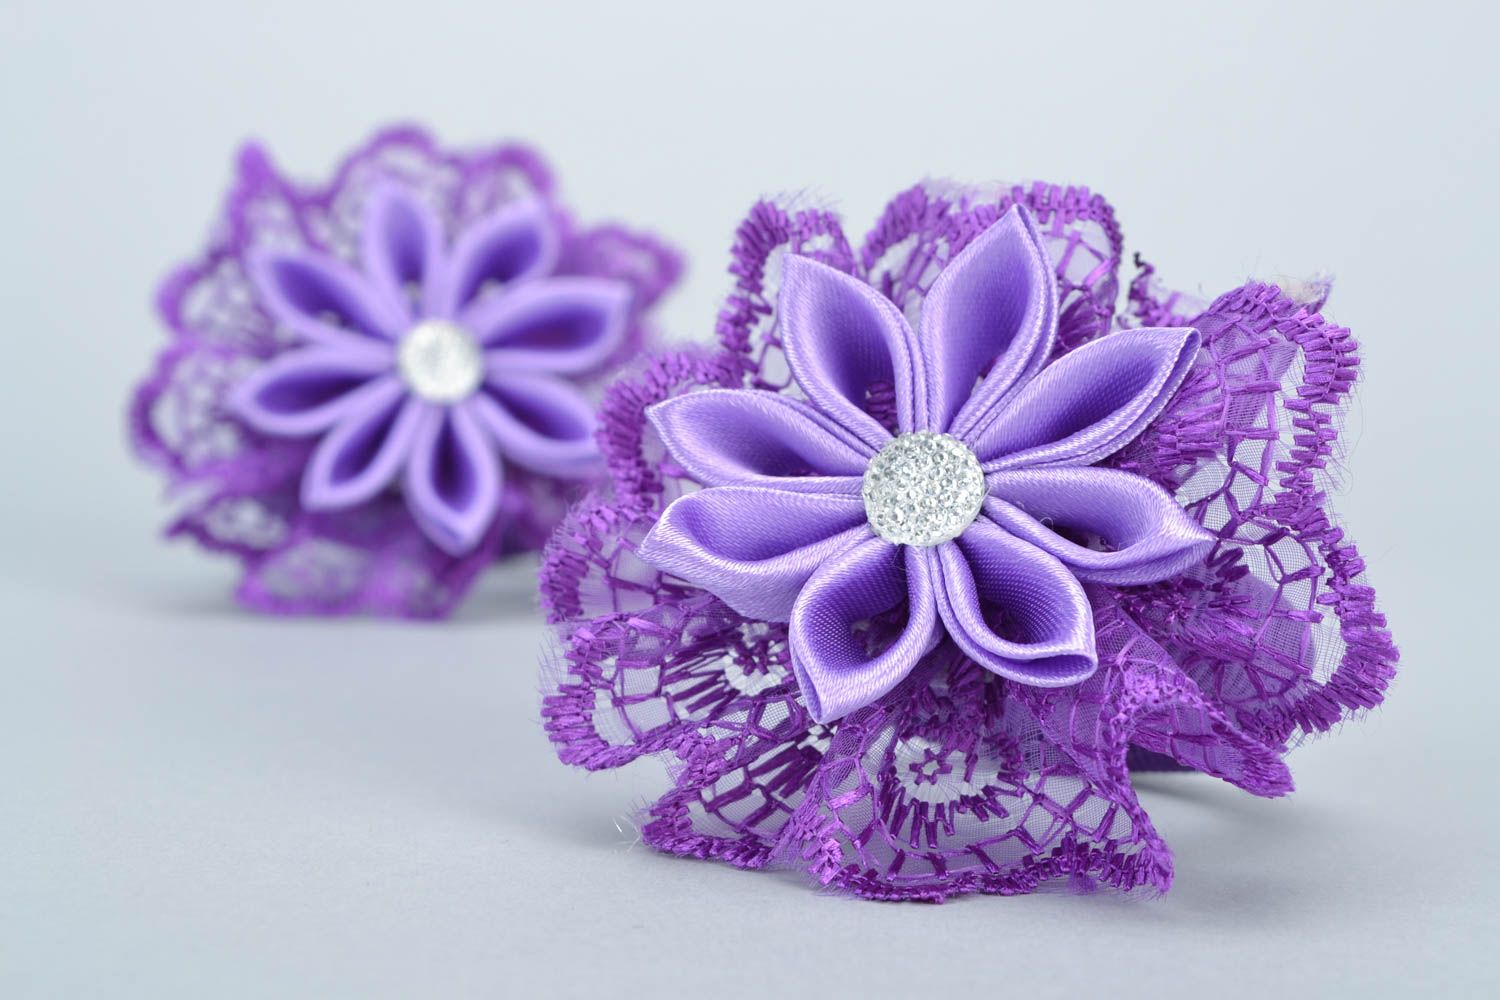 Handmade purple scrunchies with flowers made of satin ribbons kanzashi technique 2 pieces photo 3